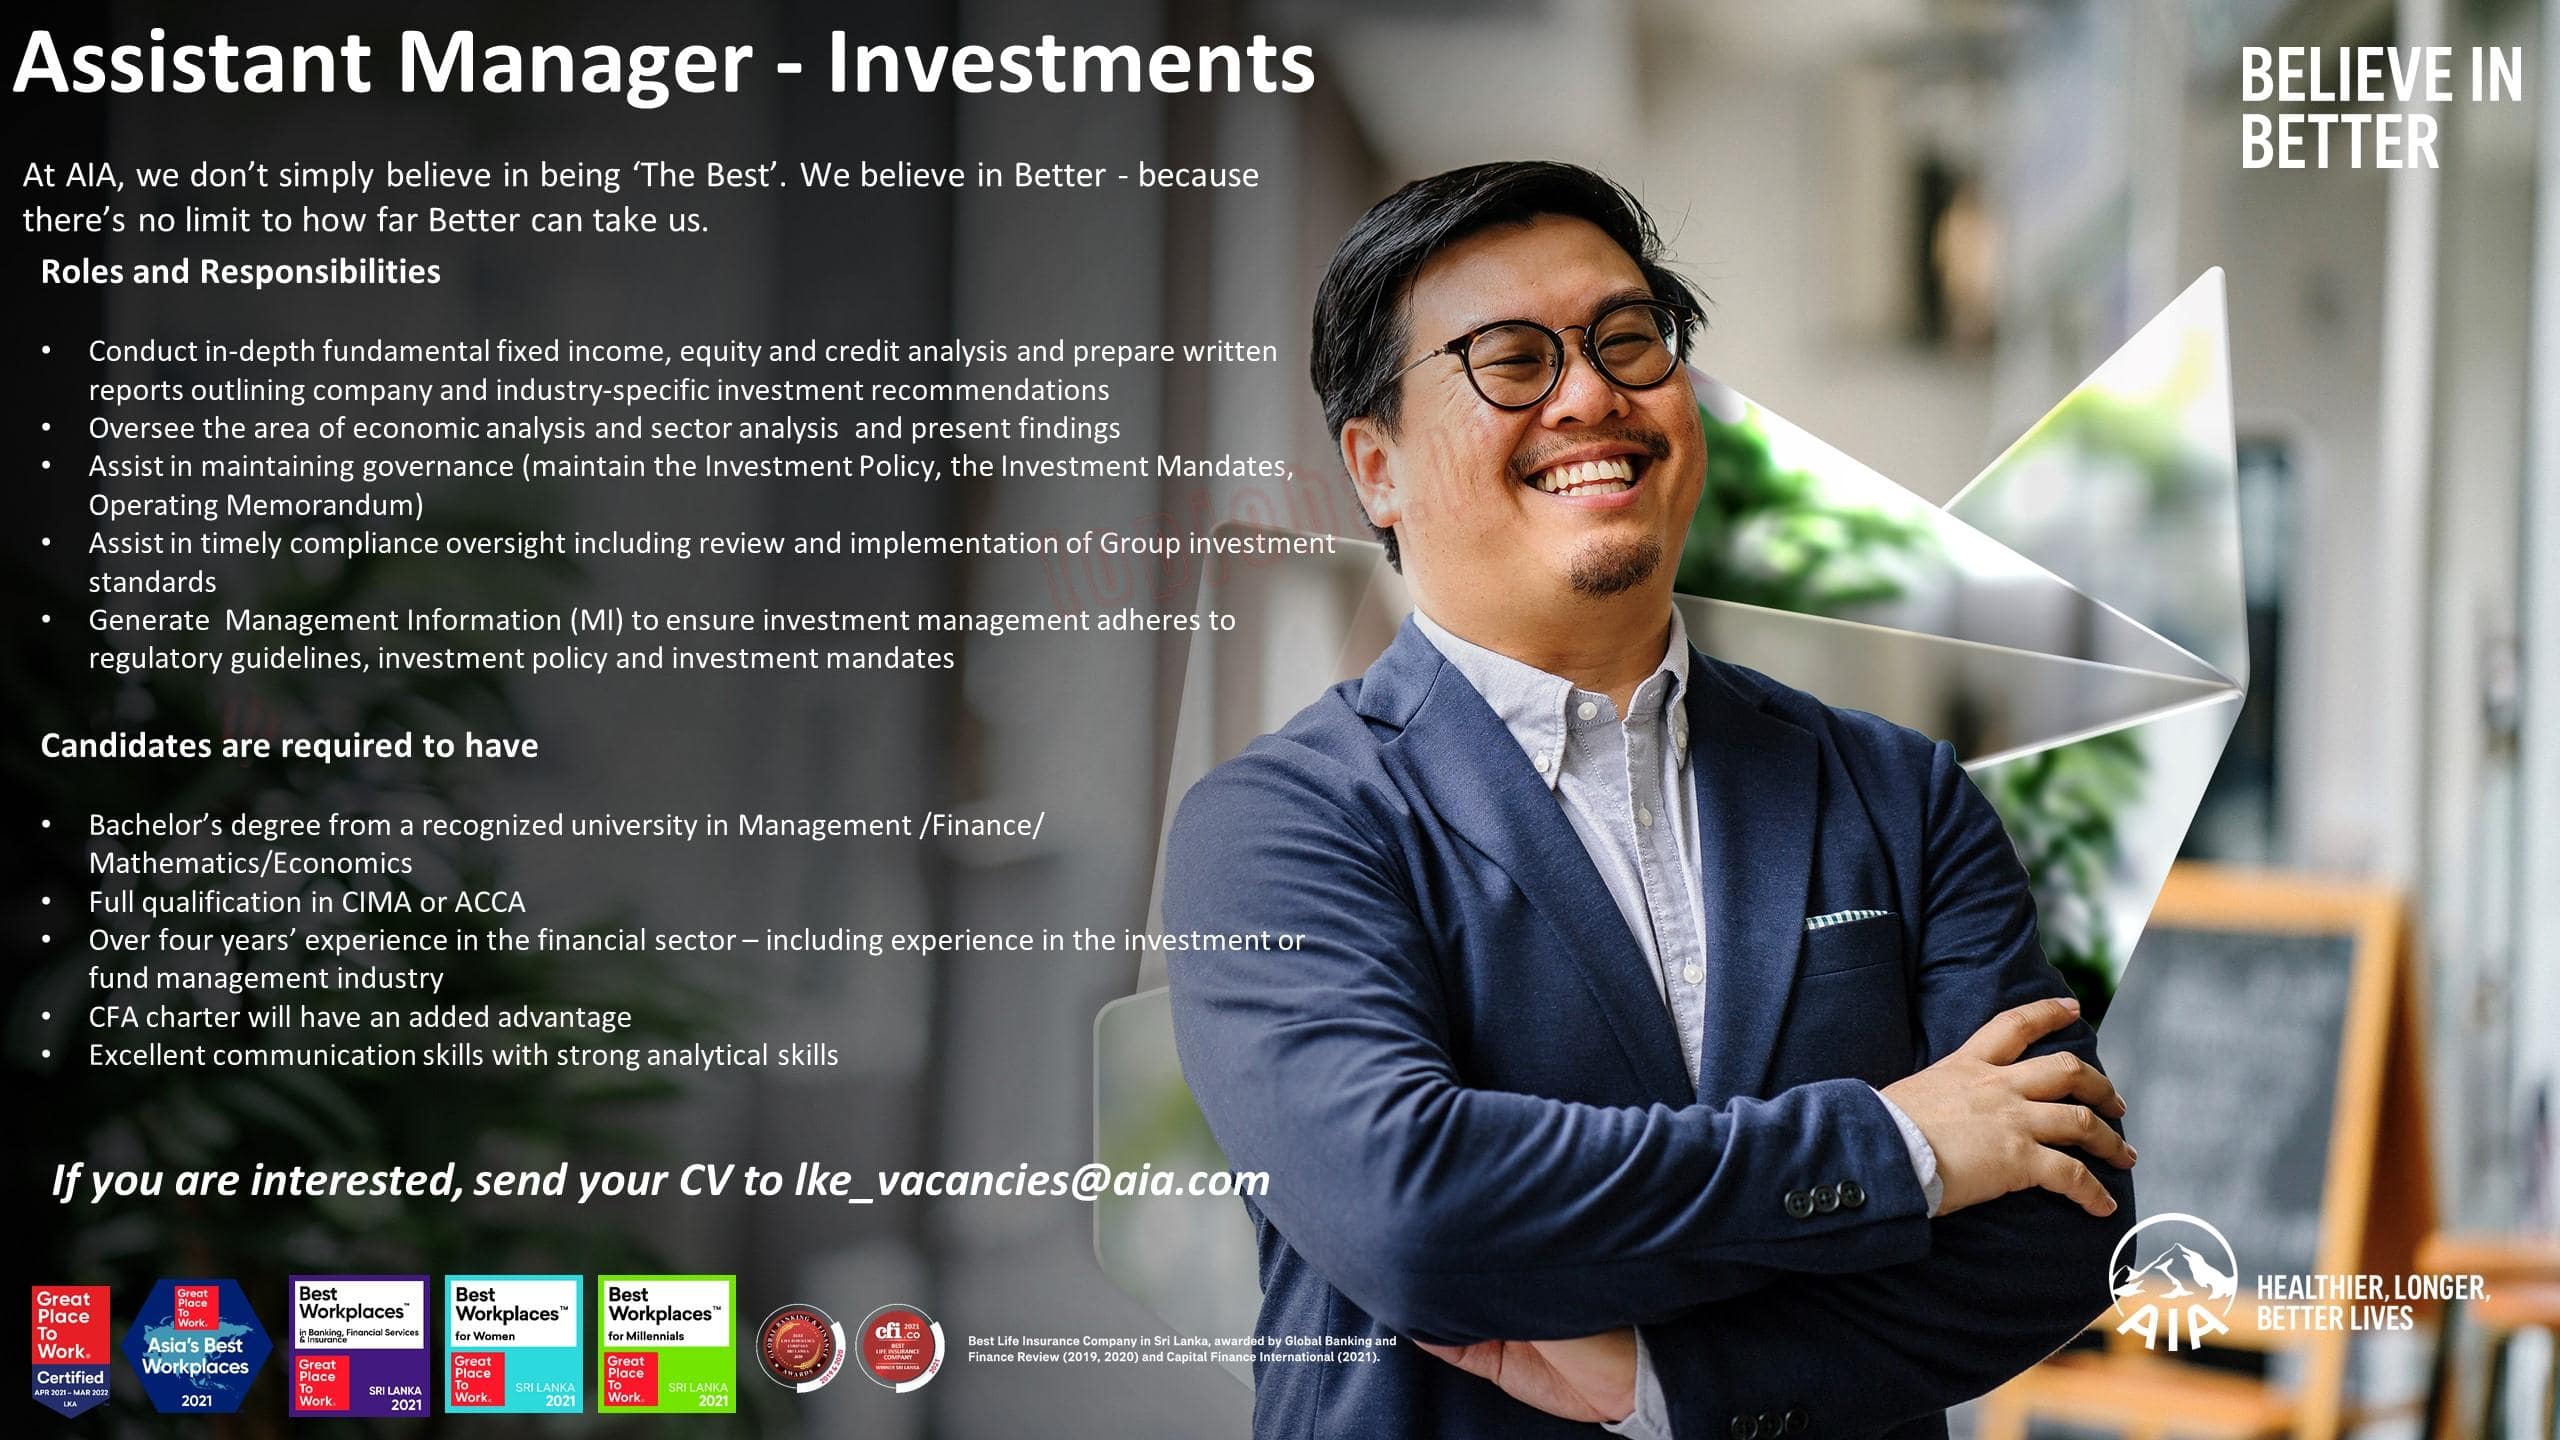 Assistant Manager - Investments Vacancy in AIA Insurance